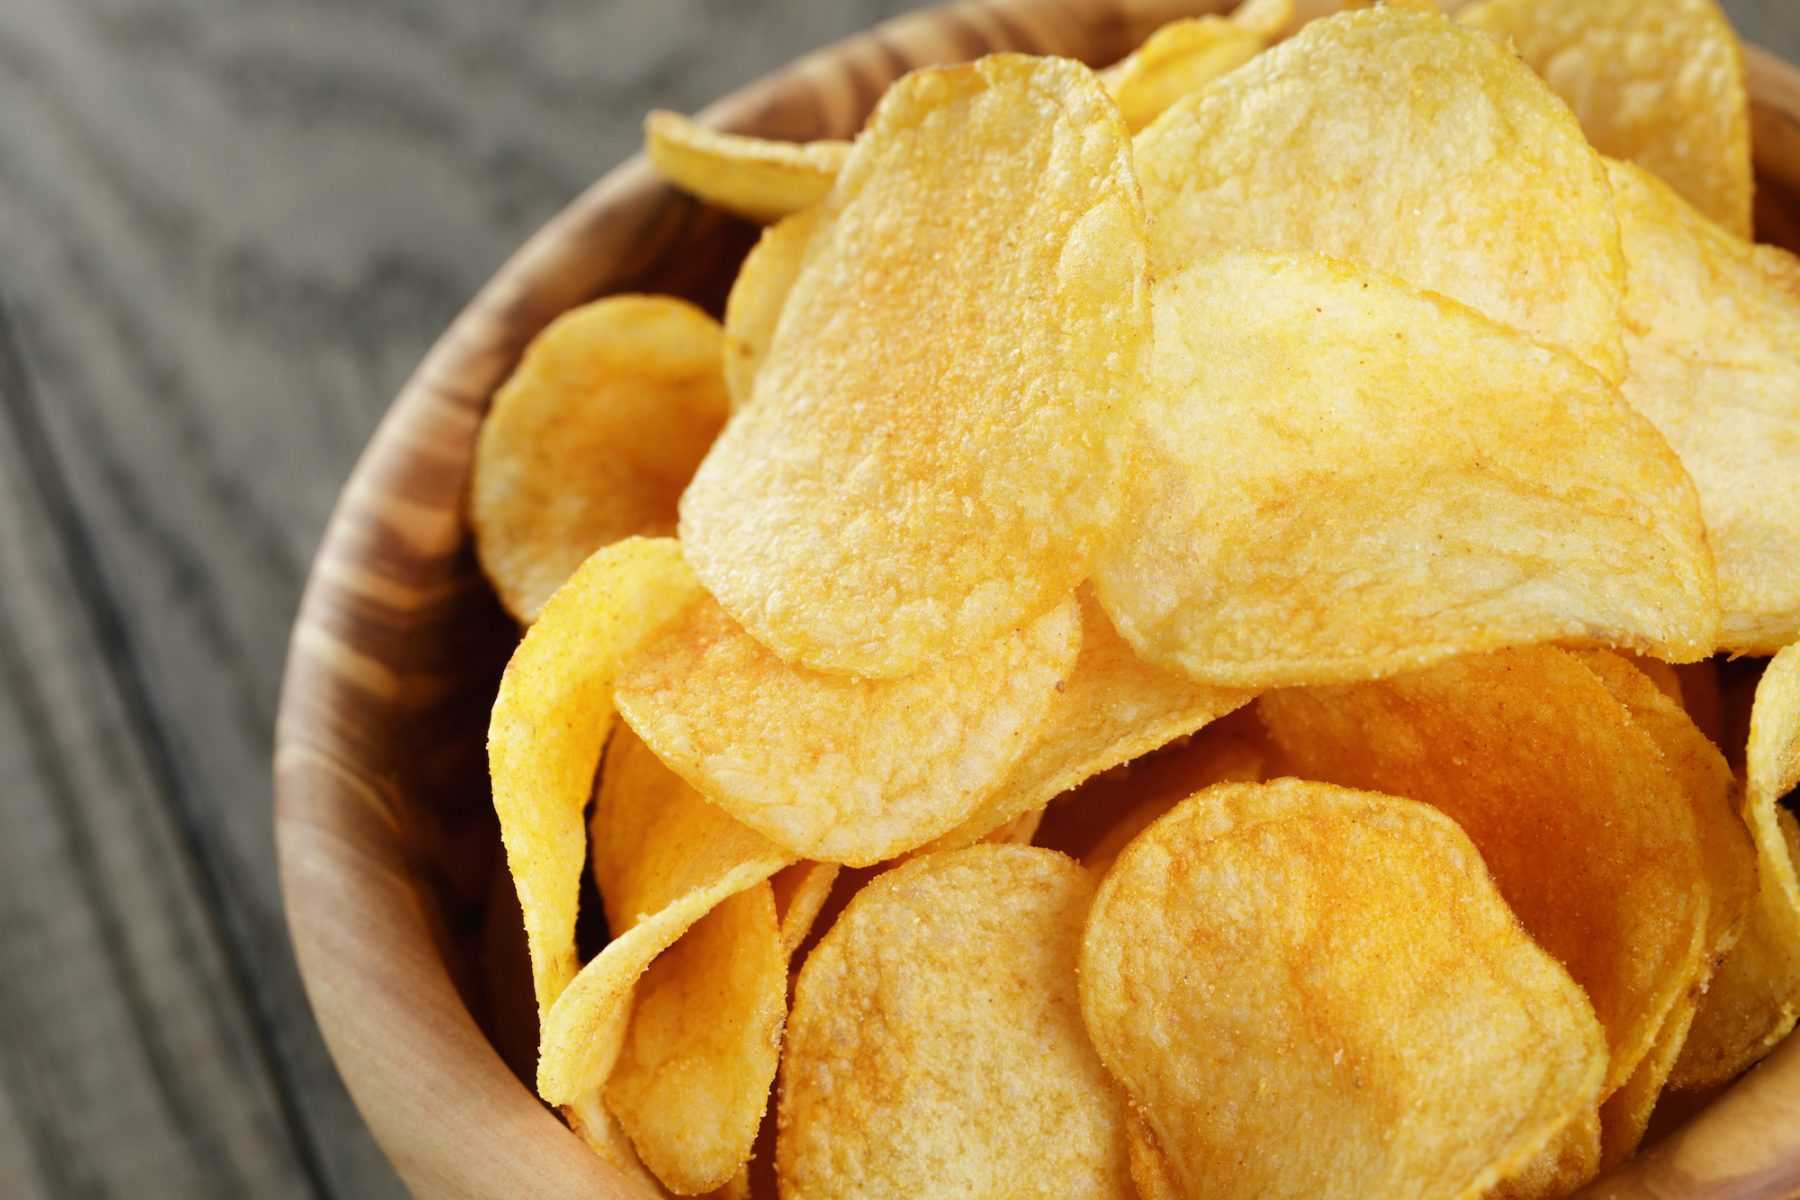 Potato chips and other salty foods